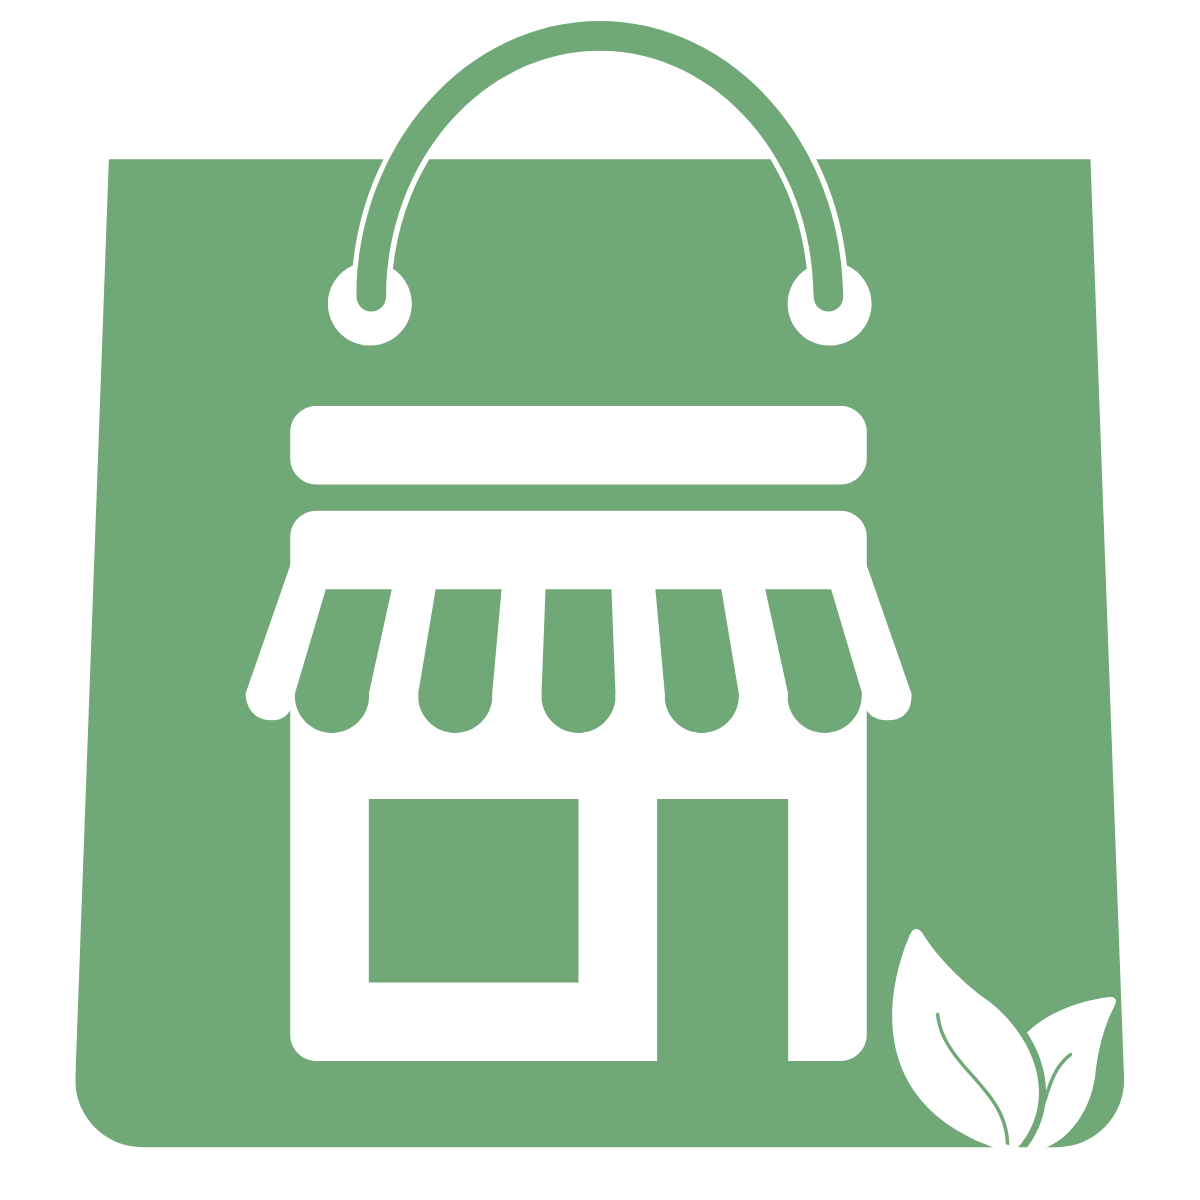 Hire Shopify Experts to integrate Greeniemart app into a Shopify store